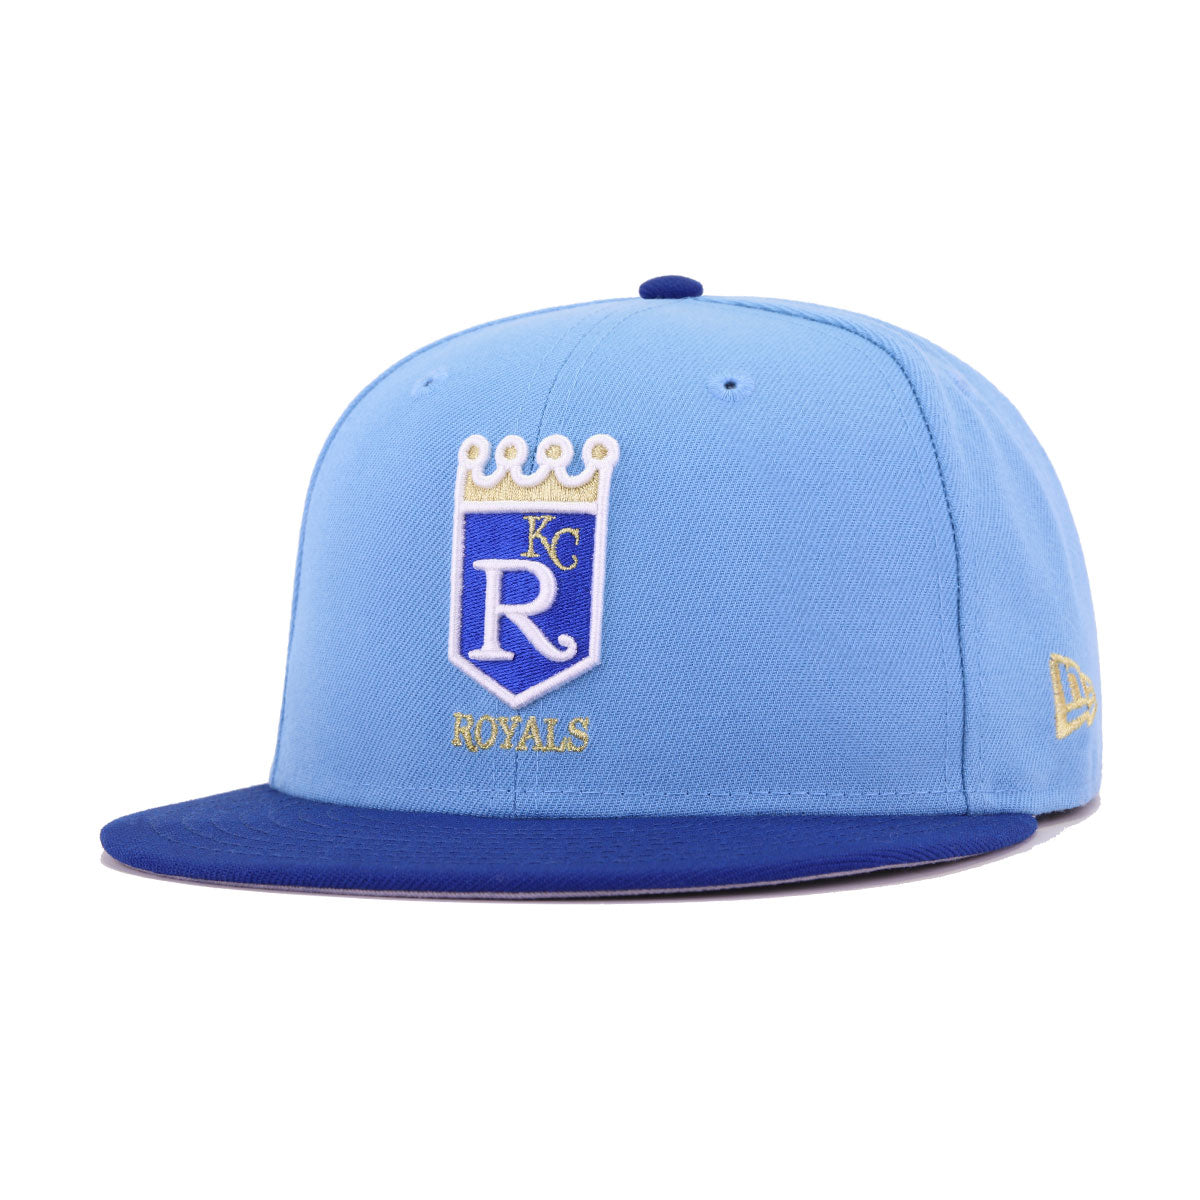 Small changes to Royals uniforms: Solid blue hat with powder blue jerseys :  r/baseball